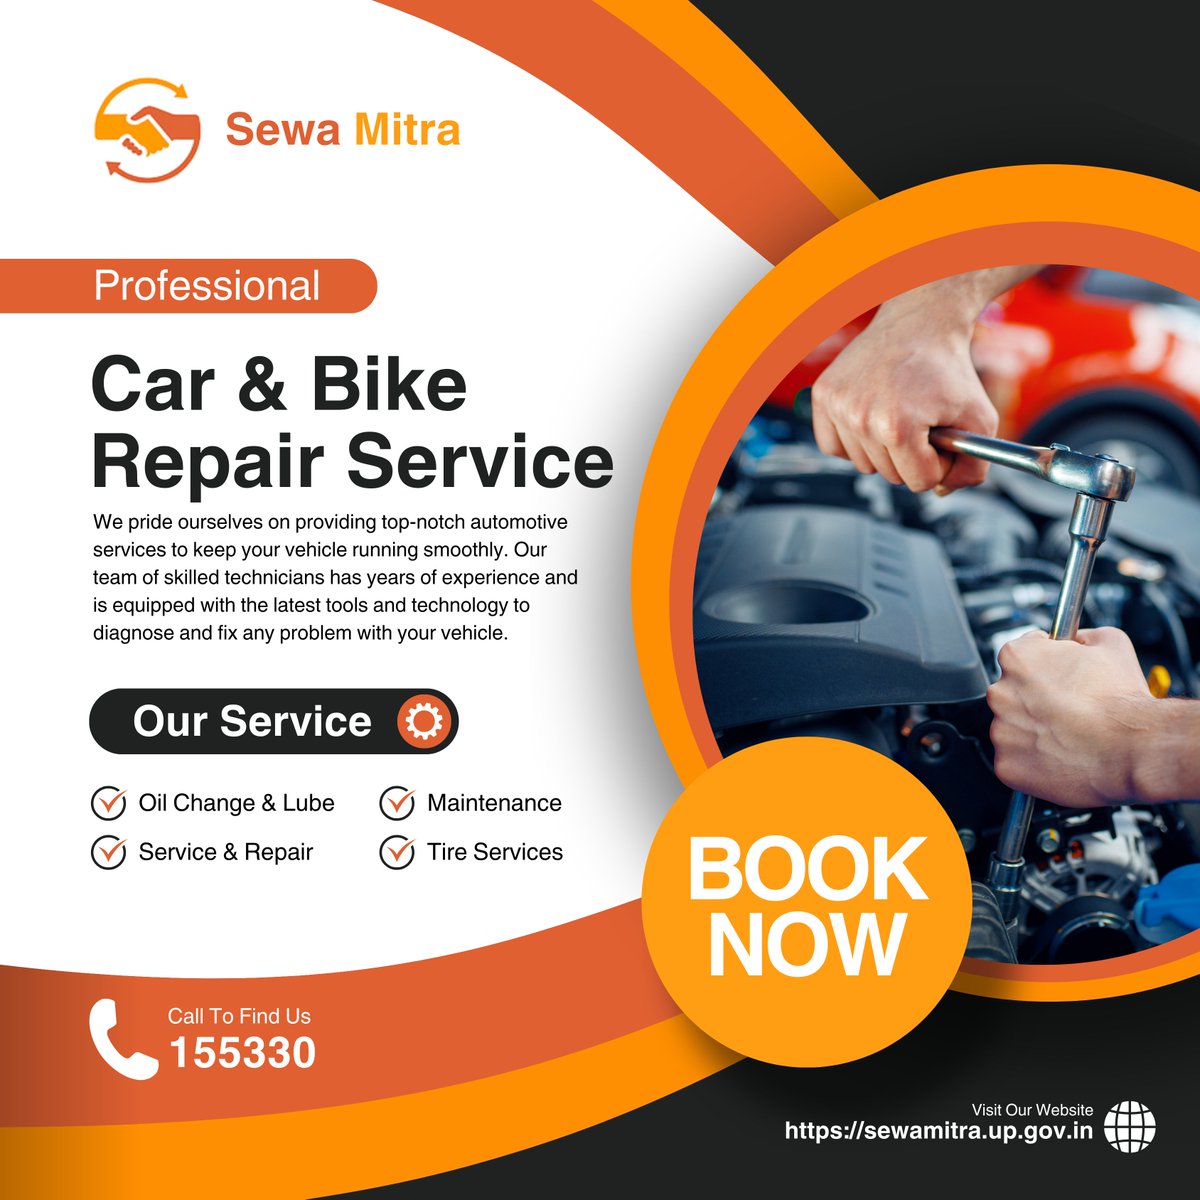 Call us now for Car & Bike Repair Services at 155330

#carbike #car #cars #bikerepair #bikerepairs #bikerepairing #bikerepairs4u #bikerepairshop #carrepair #carrepairs #carrepairing #carrepairshop #carrepairtools #carrepairsystem #carrepairservice #carrepairservices #sewamitra